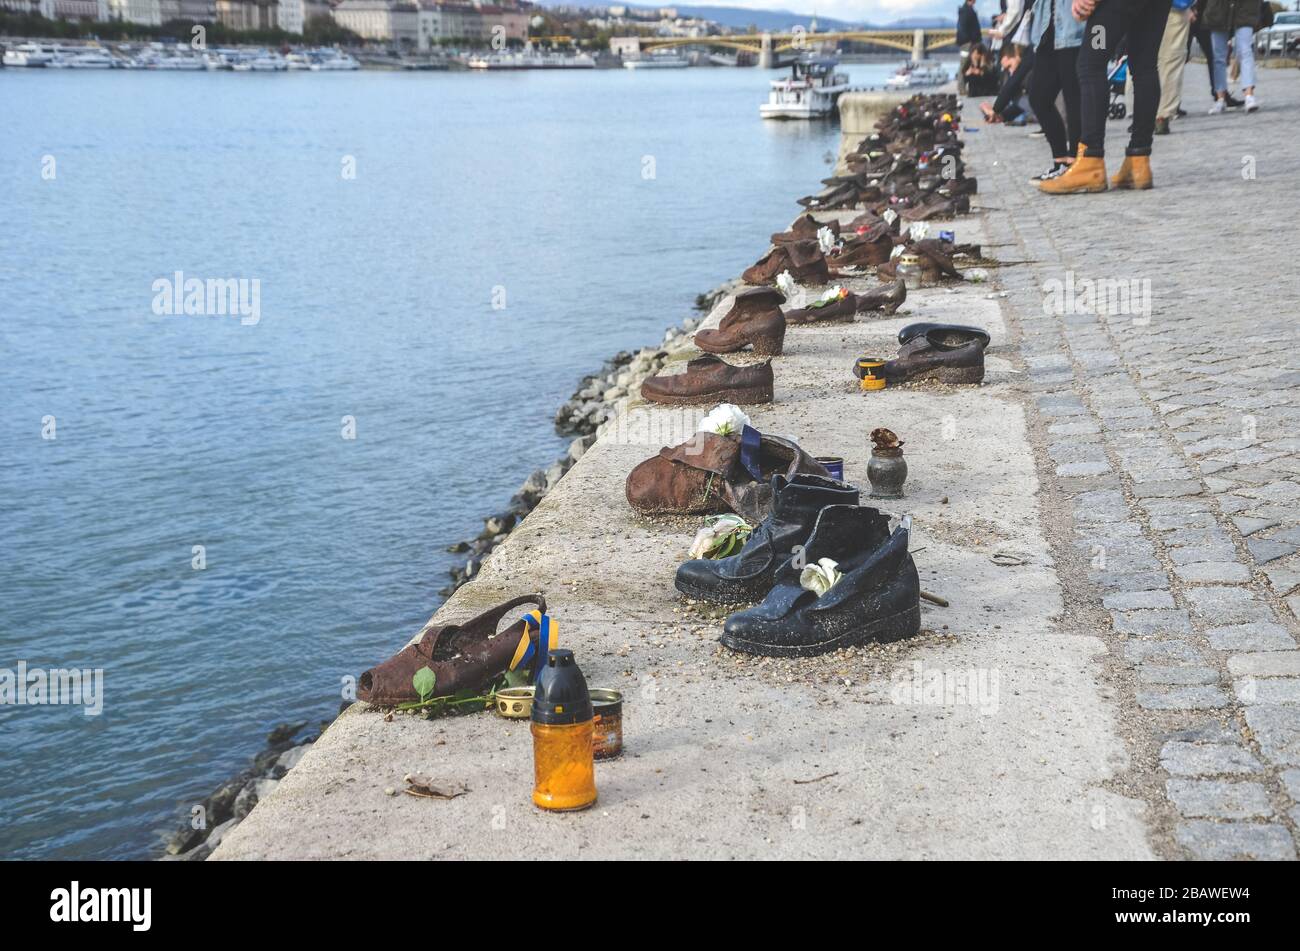 Budapest, Hungary - Nov 6, 2019: Shoes on the Danube Bank. Monument to honour the Jews who were killed by fascists during World War II. Iron shoes. Blurred Danube and tourists in the background. Stock Photo